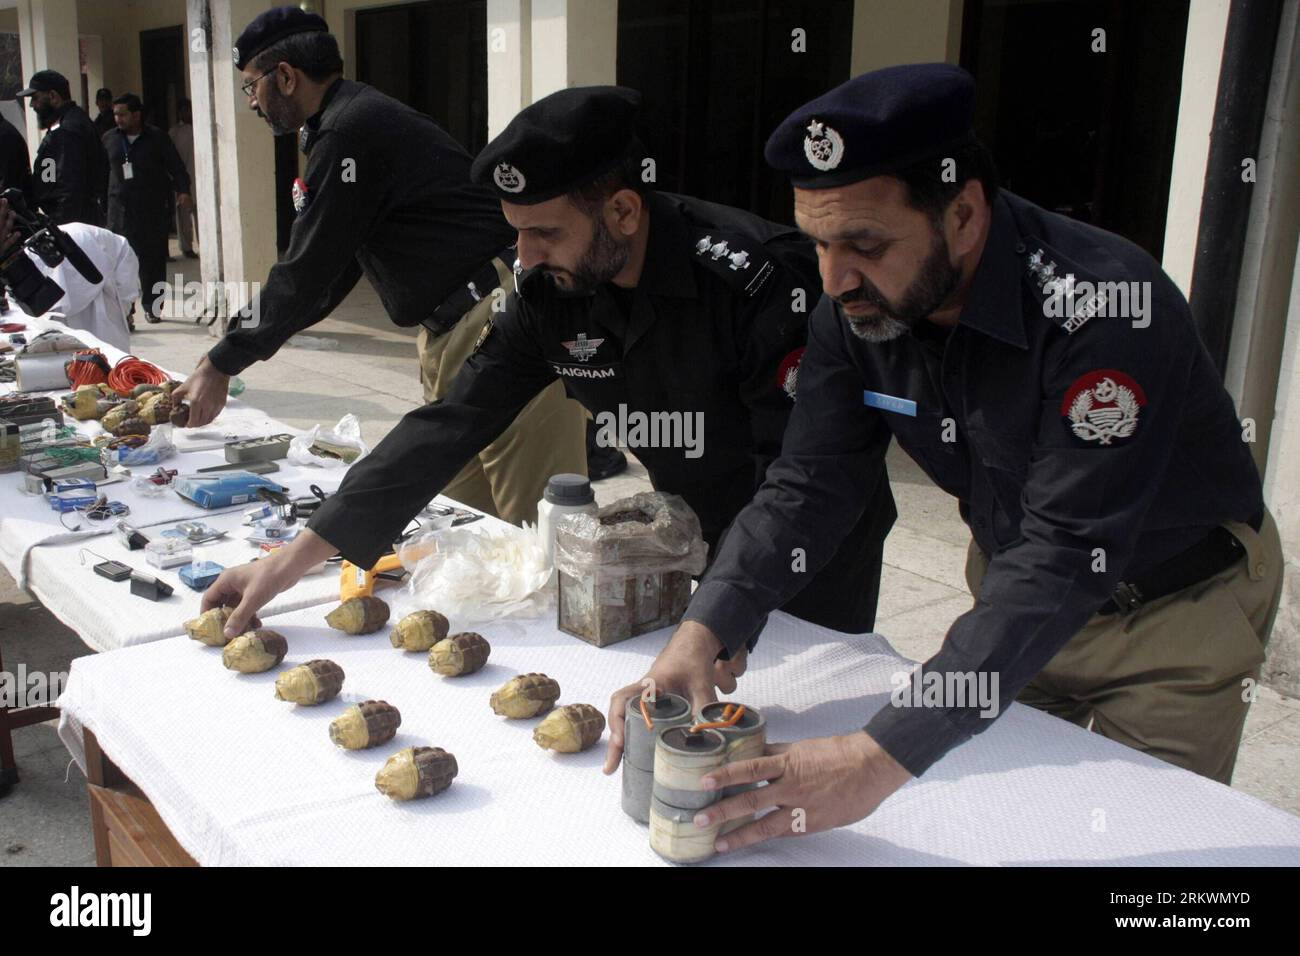 Bildnummer: 58711928  Datum: 16.11.2012  Copyright: imago/Xinhua (121116) -- LAHORE, Nov. 16, 2012 (Xinhua) -- Pakistani policemen display explosive materials to media at a news conference in Lahore, Pakistan, Nov. 16, 2012. An intelligence agency in a joint operation with police seized heavy quantity of weapons and ammunitions and arrested 12 suspected terrorists from different areas of Gujrat district in eastern Punjab province, local media reported. (Xinhua/Jamil Ahmed) PAKISTAN-UNREST-POLICE-TERROR-SEIZURE PUBLICATIONxNOTxINxCHN Gesellschaft Sicherheit Polizei Waffen Munition x0x xds 2012 Stock Photo